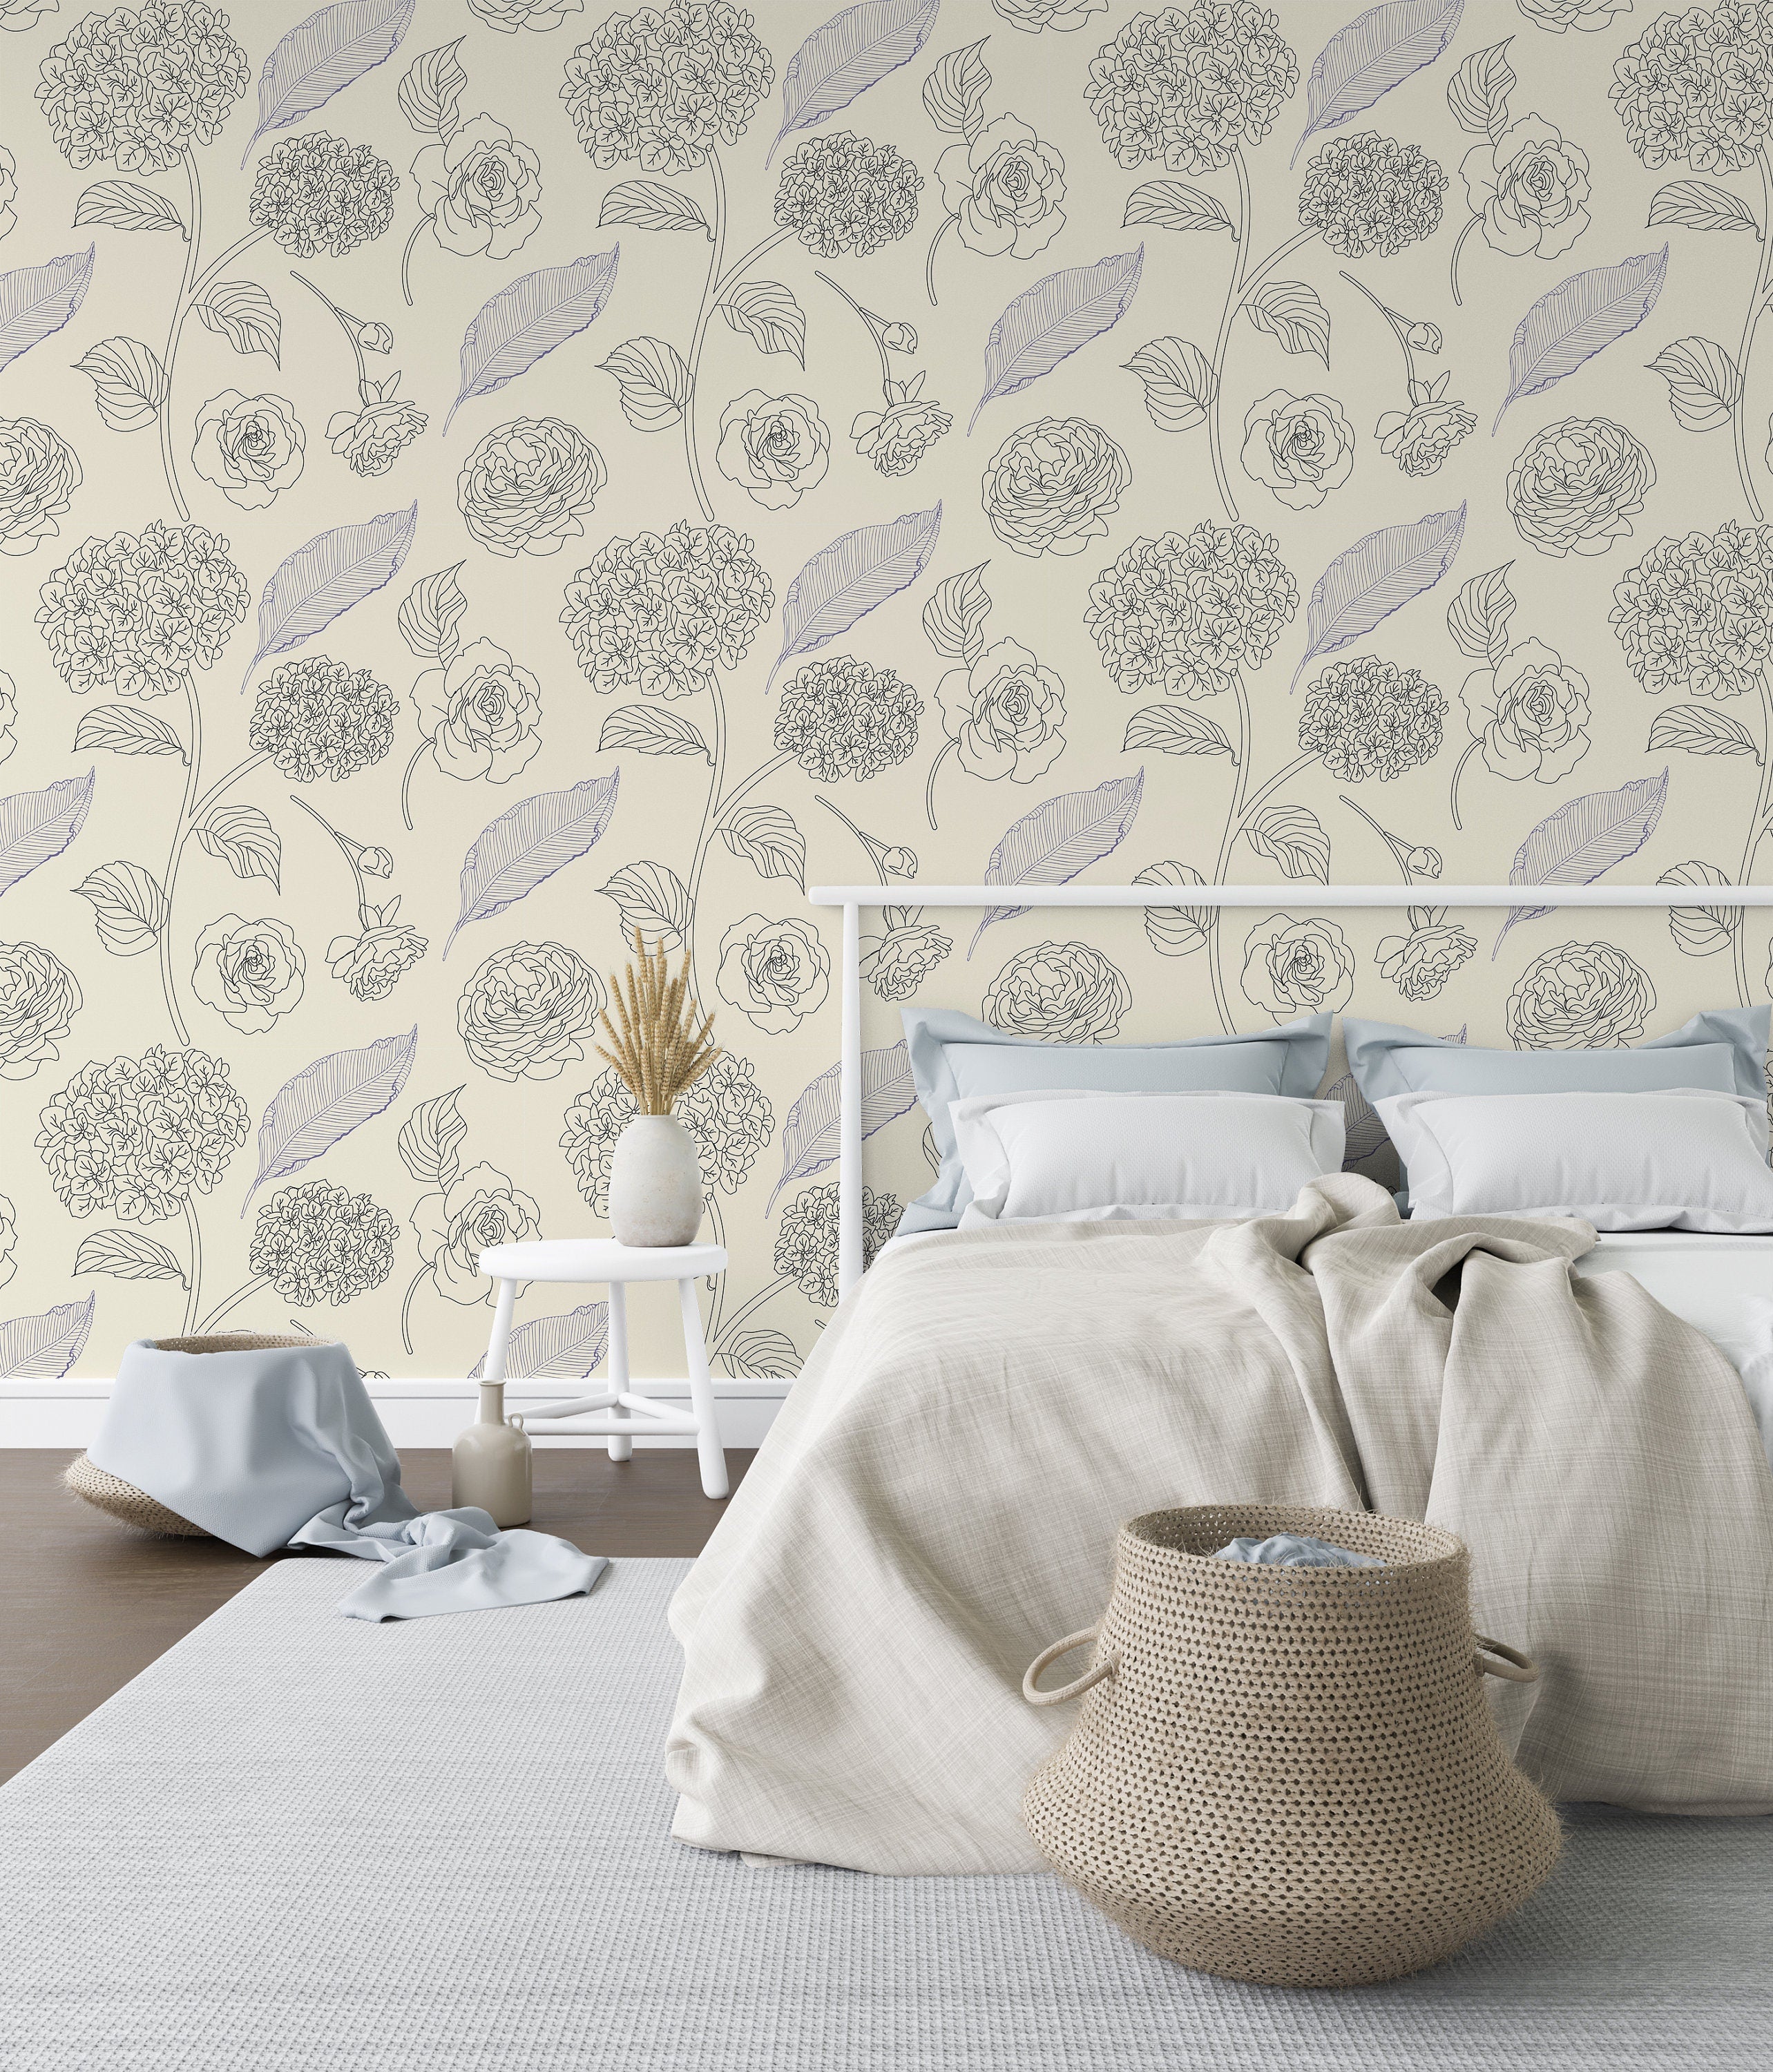 Ivory Floral Wallpaper | Wallpaper Peel and Stick | Removable Wallpaper | Peel and Stick Wallpaper | Wall Paper Peel And Stick | 2171 - JamesAndColors